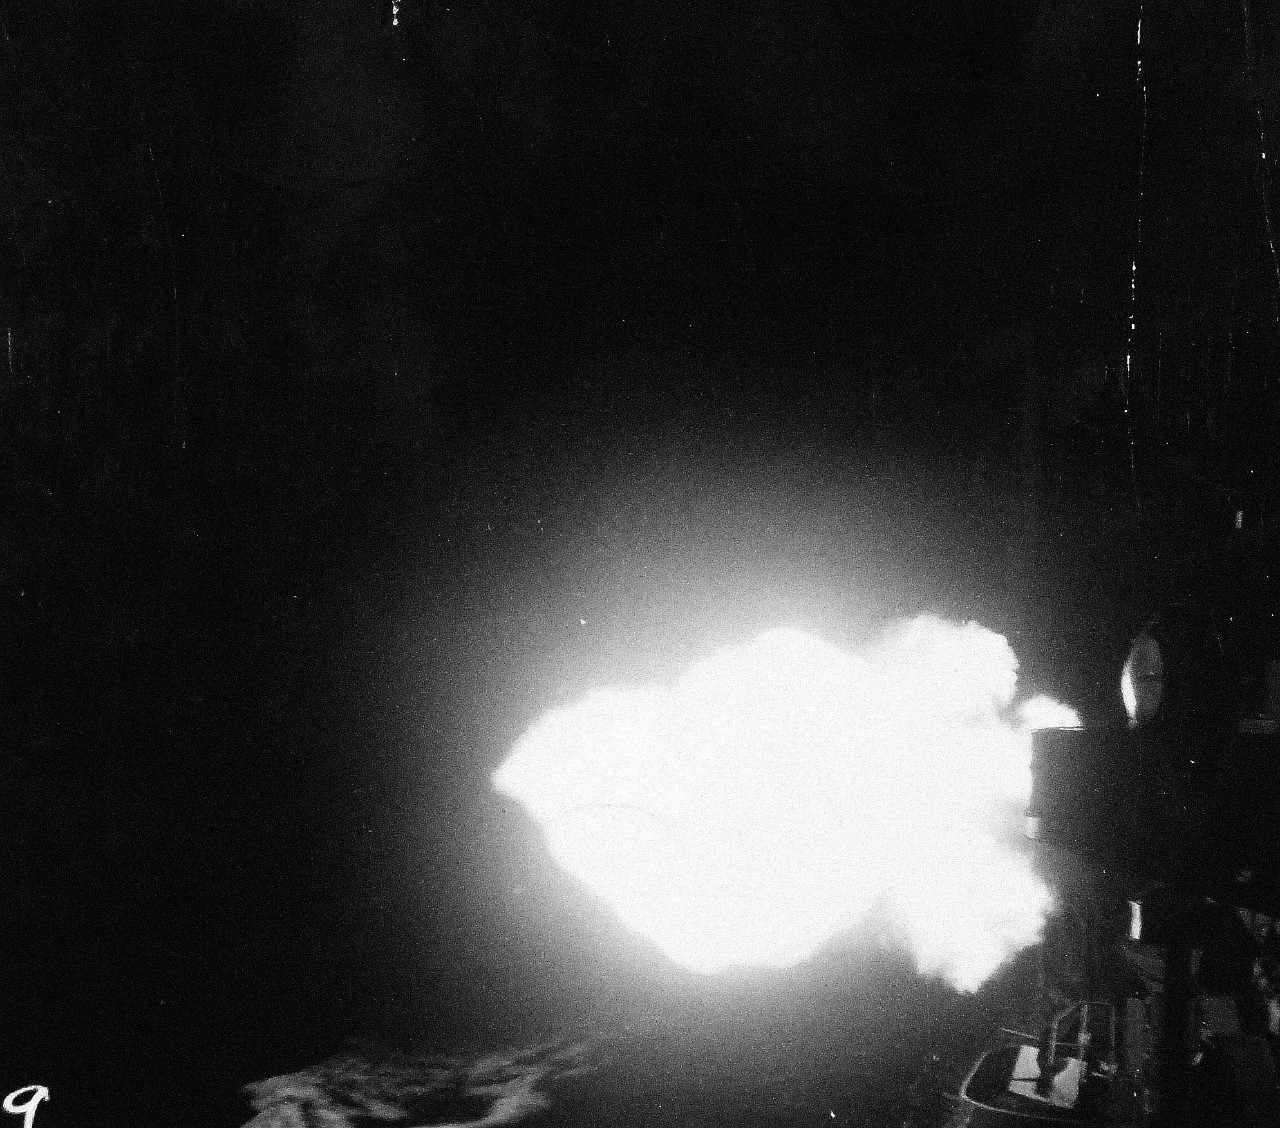 80-G-55522: Battle of the Kula Gulf, July 5-6, 1943.   Night Battery of USS St. Louis (CL-49) during the Battle of Kula Gulf.   Photographed by CPU-2, July 5-6, 1943.  Official U.S. Navy Photograph, now in the collections of the National Archives.   (2015/4/28).  